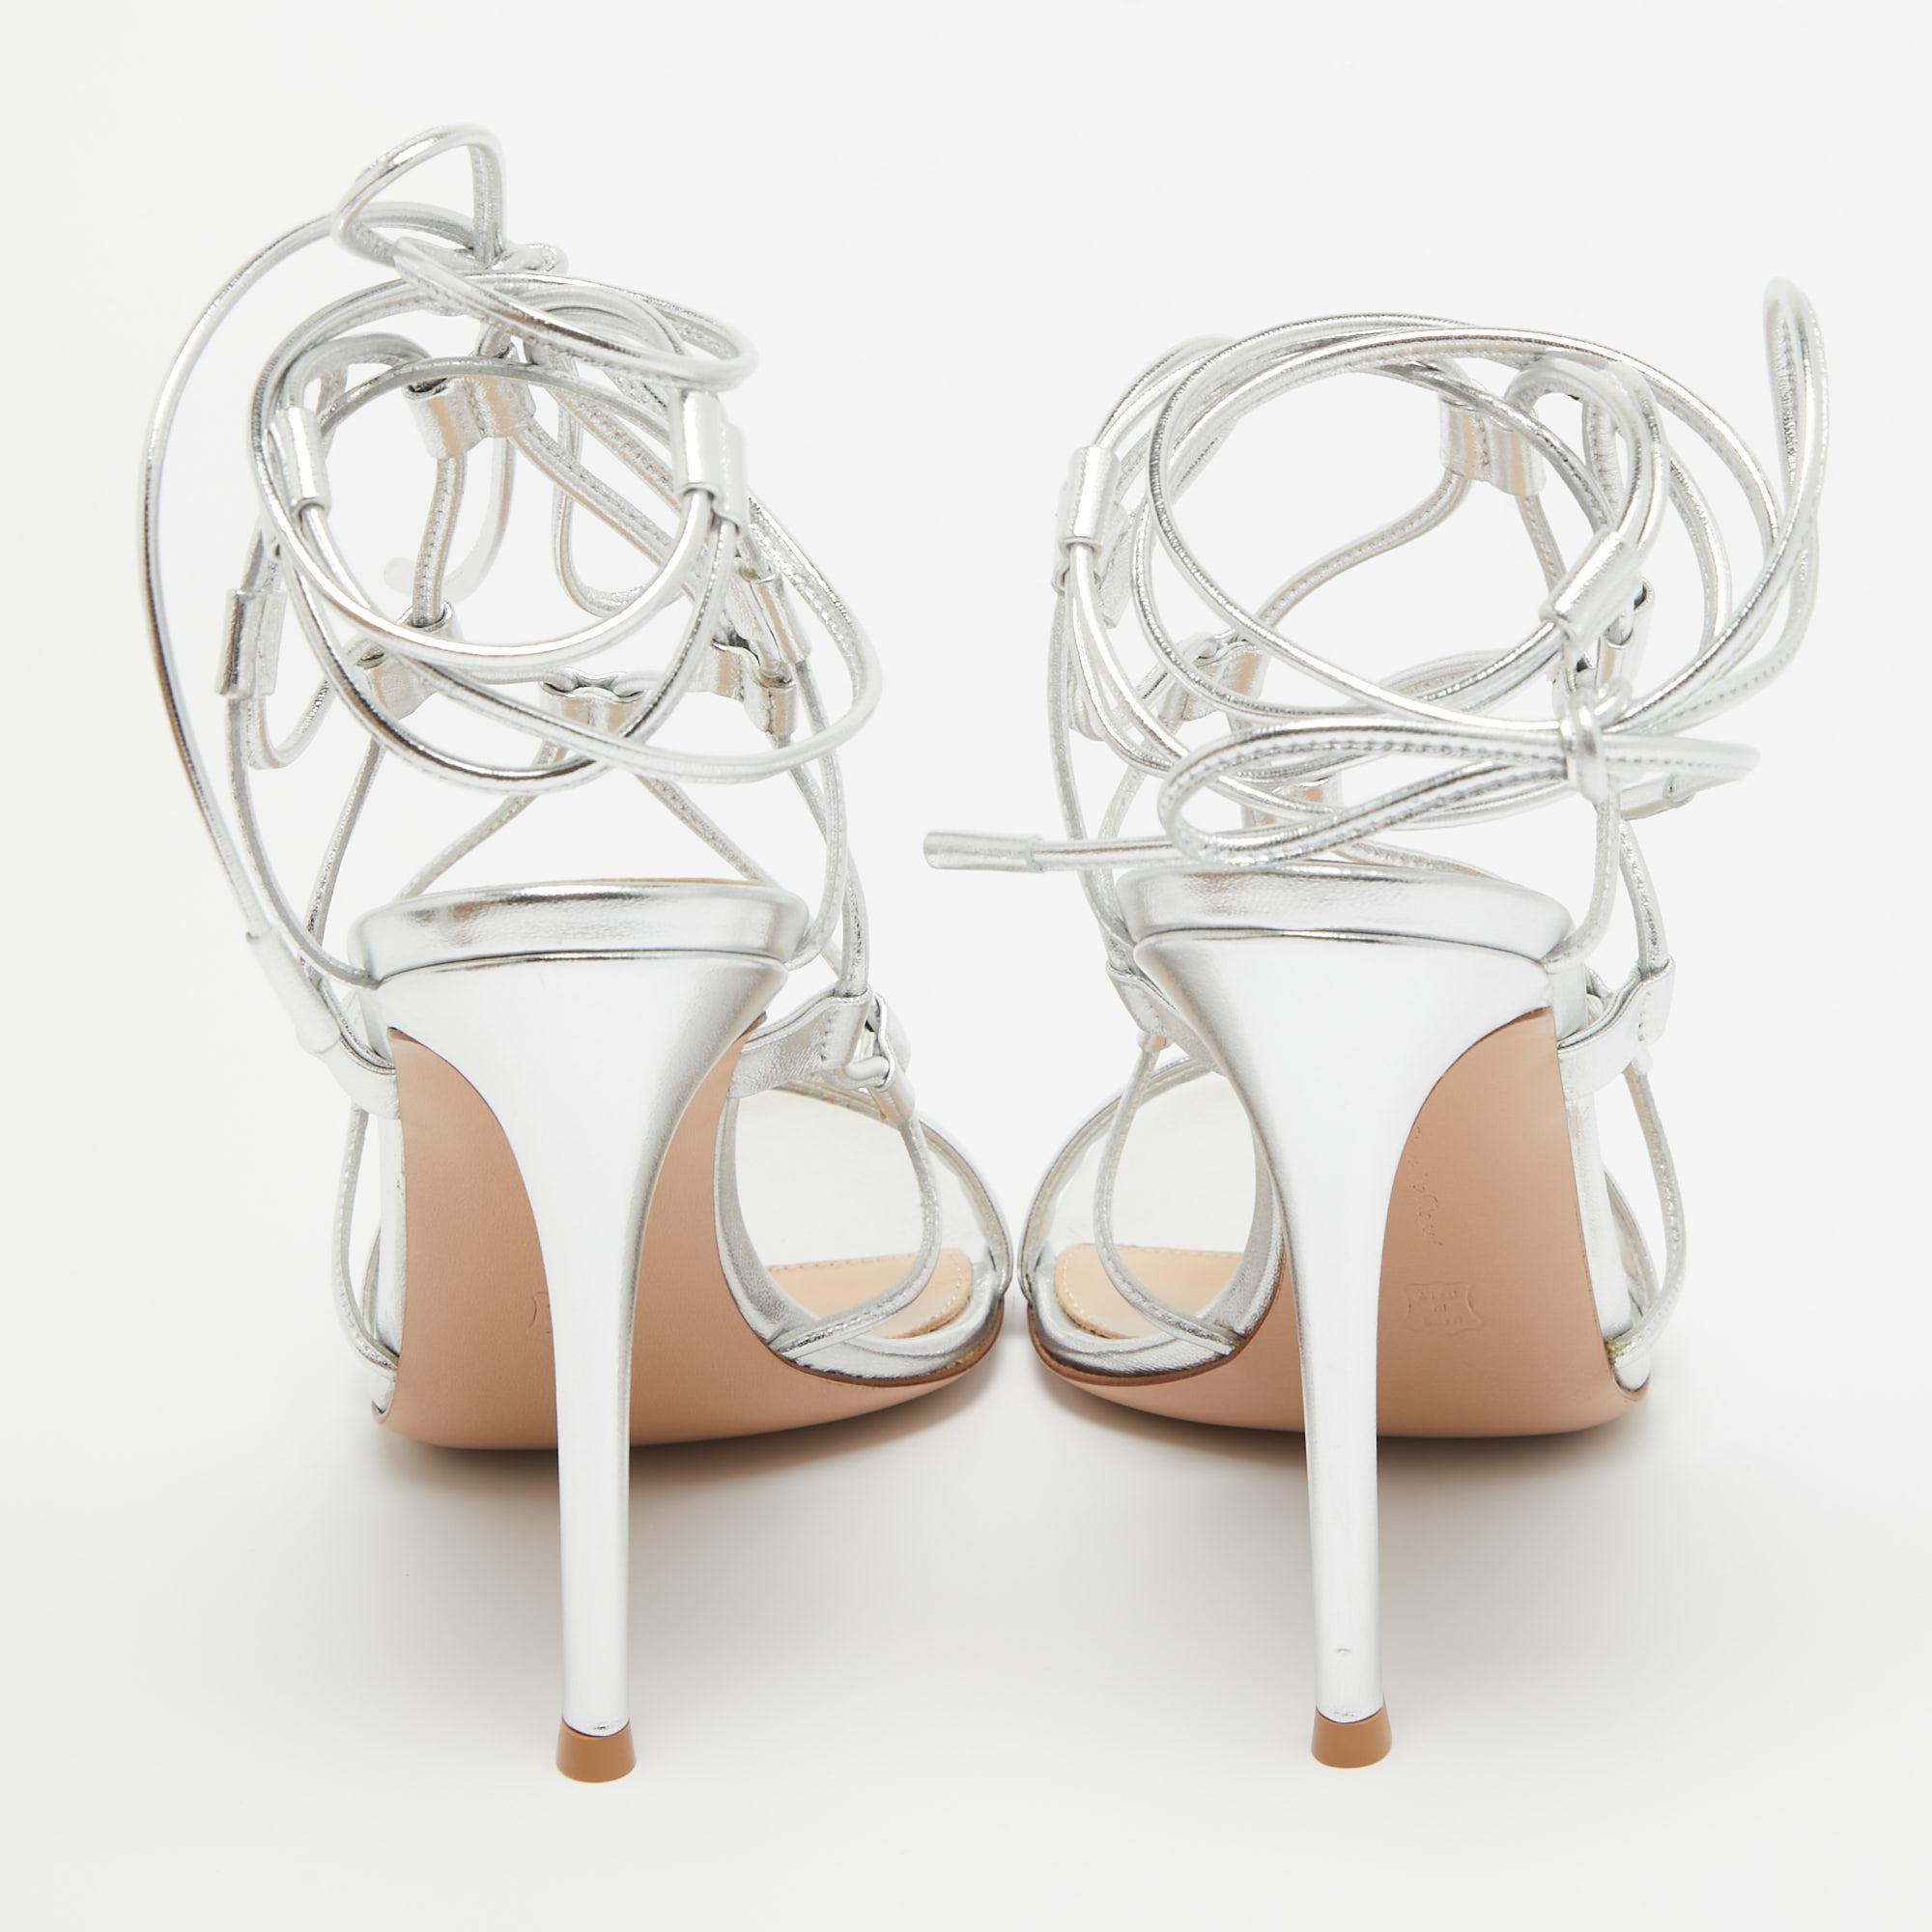 In classy silver leather, the Gianvito Rossi Giza sandals exude confident charm. Delicate straps gracefully embrace the foot, while a sturdy heel provides stability and style. With impeccable craftsmanship and timeless design, these sandals